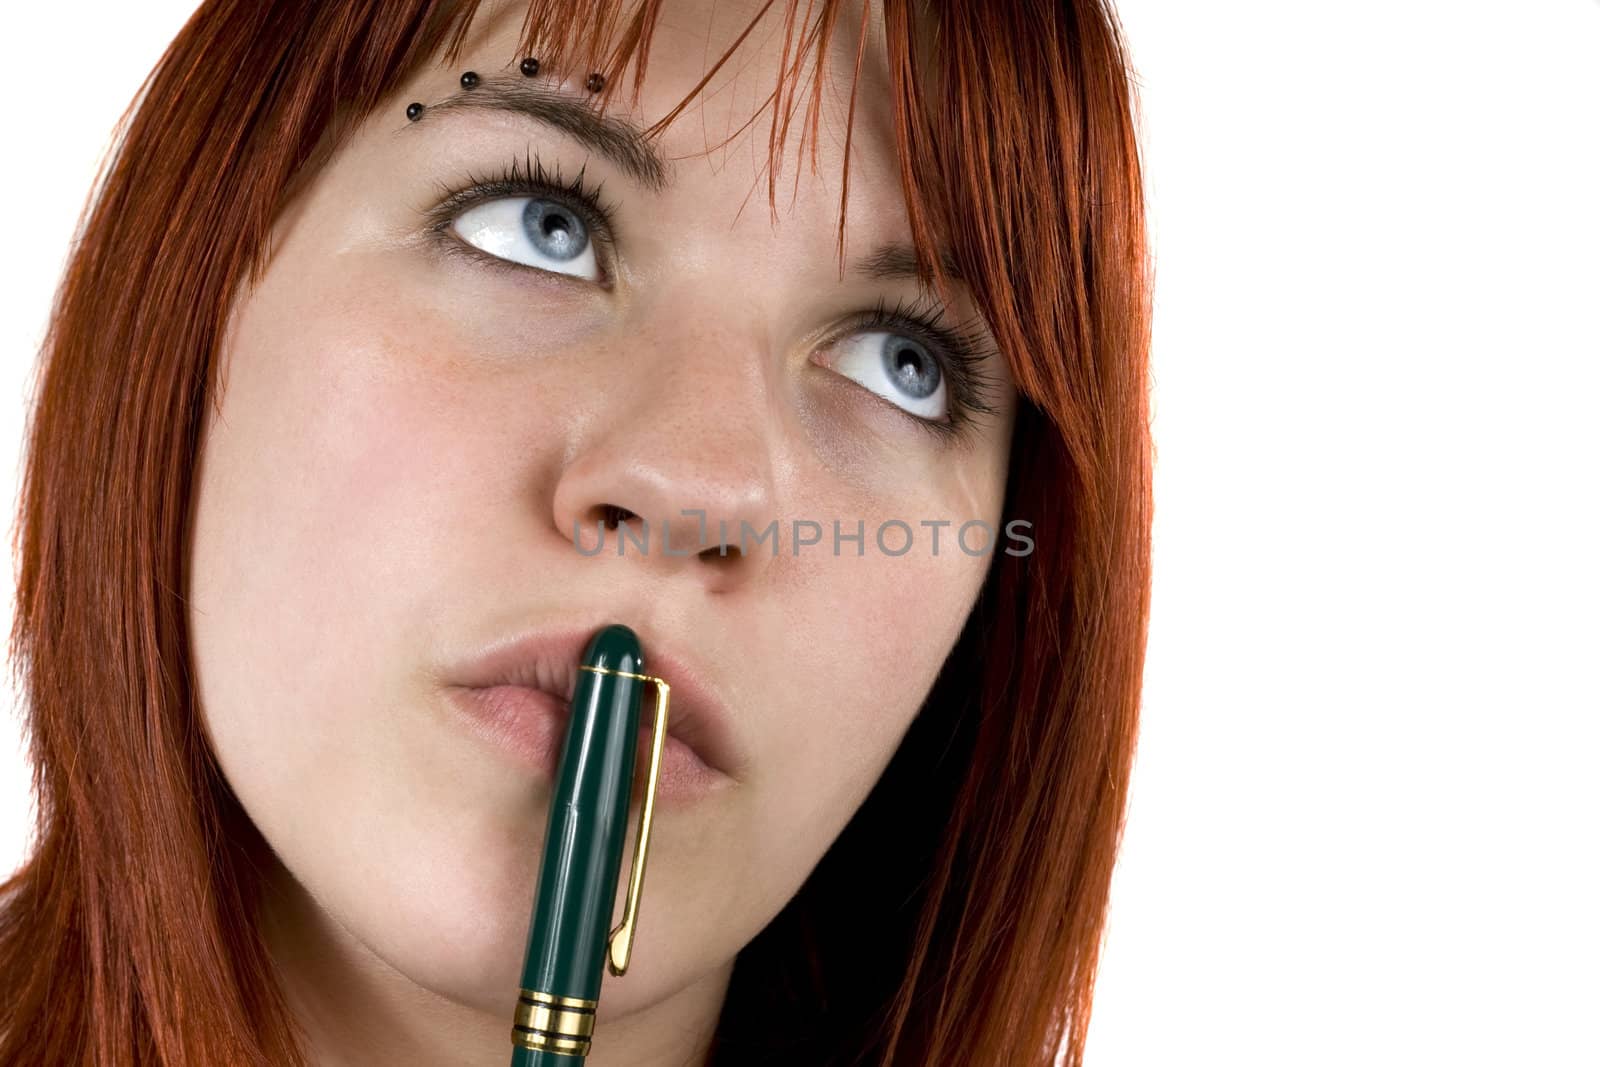 Cute girl with redhair pensive with pen on her lips.